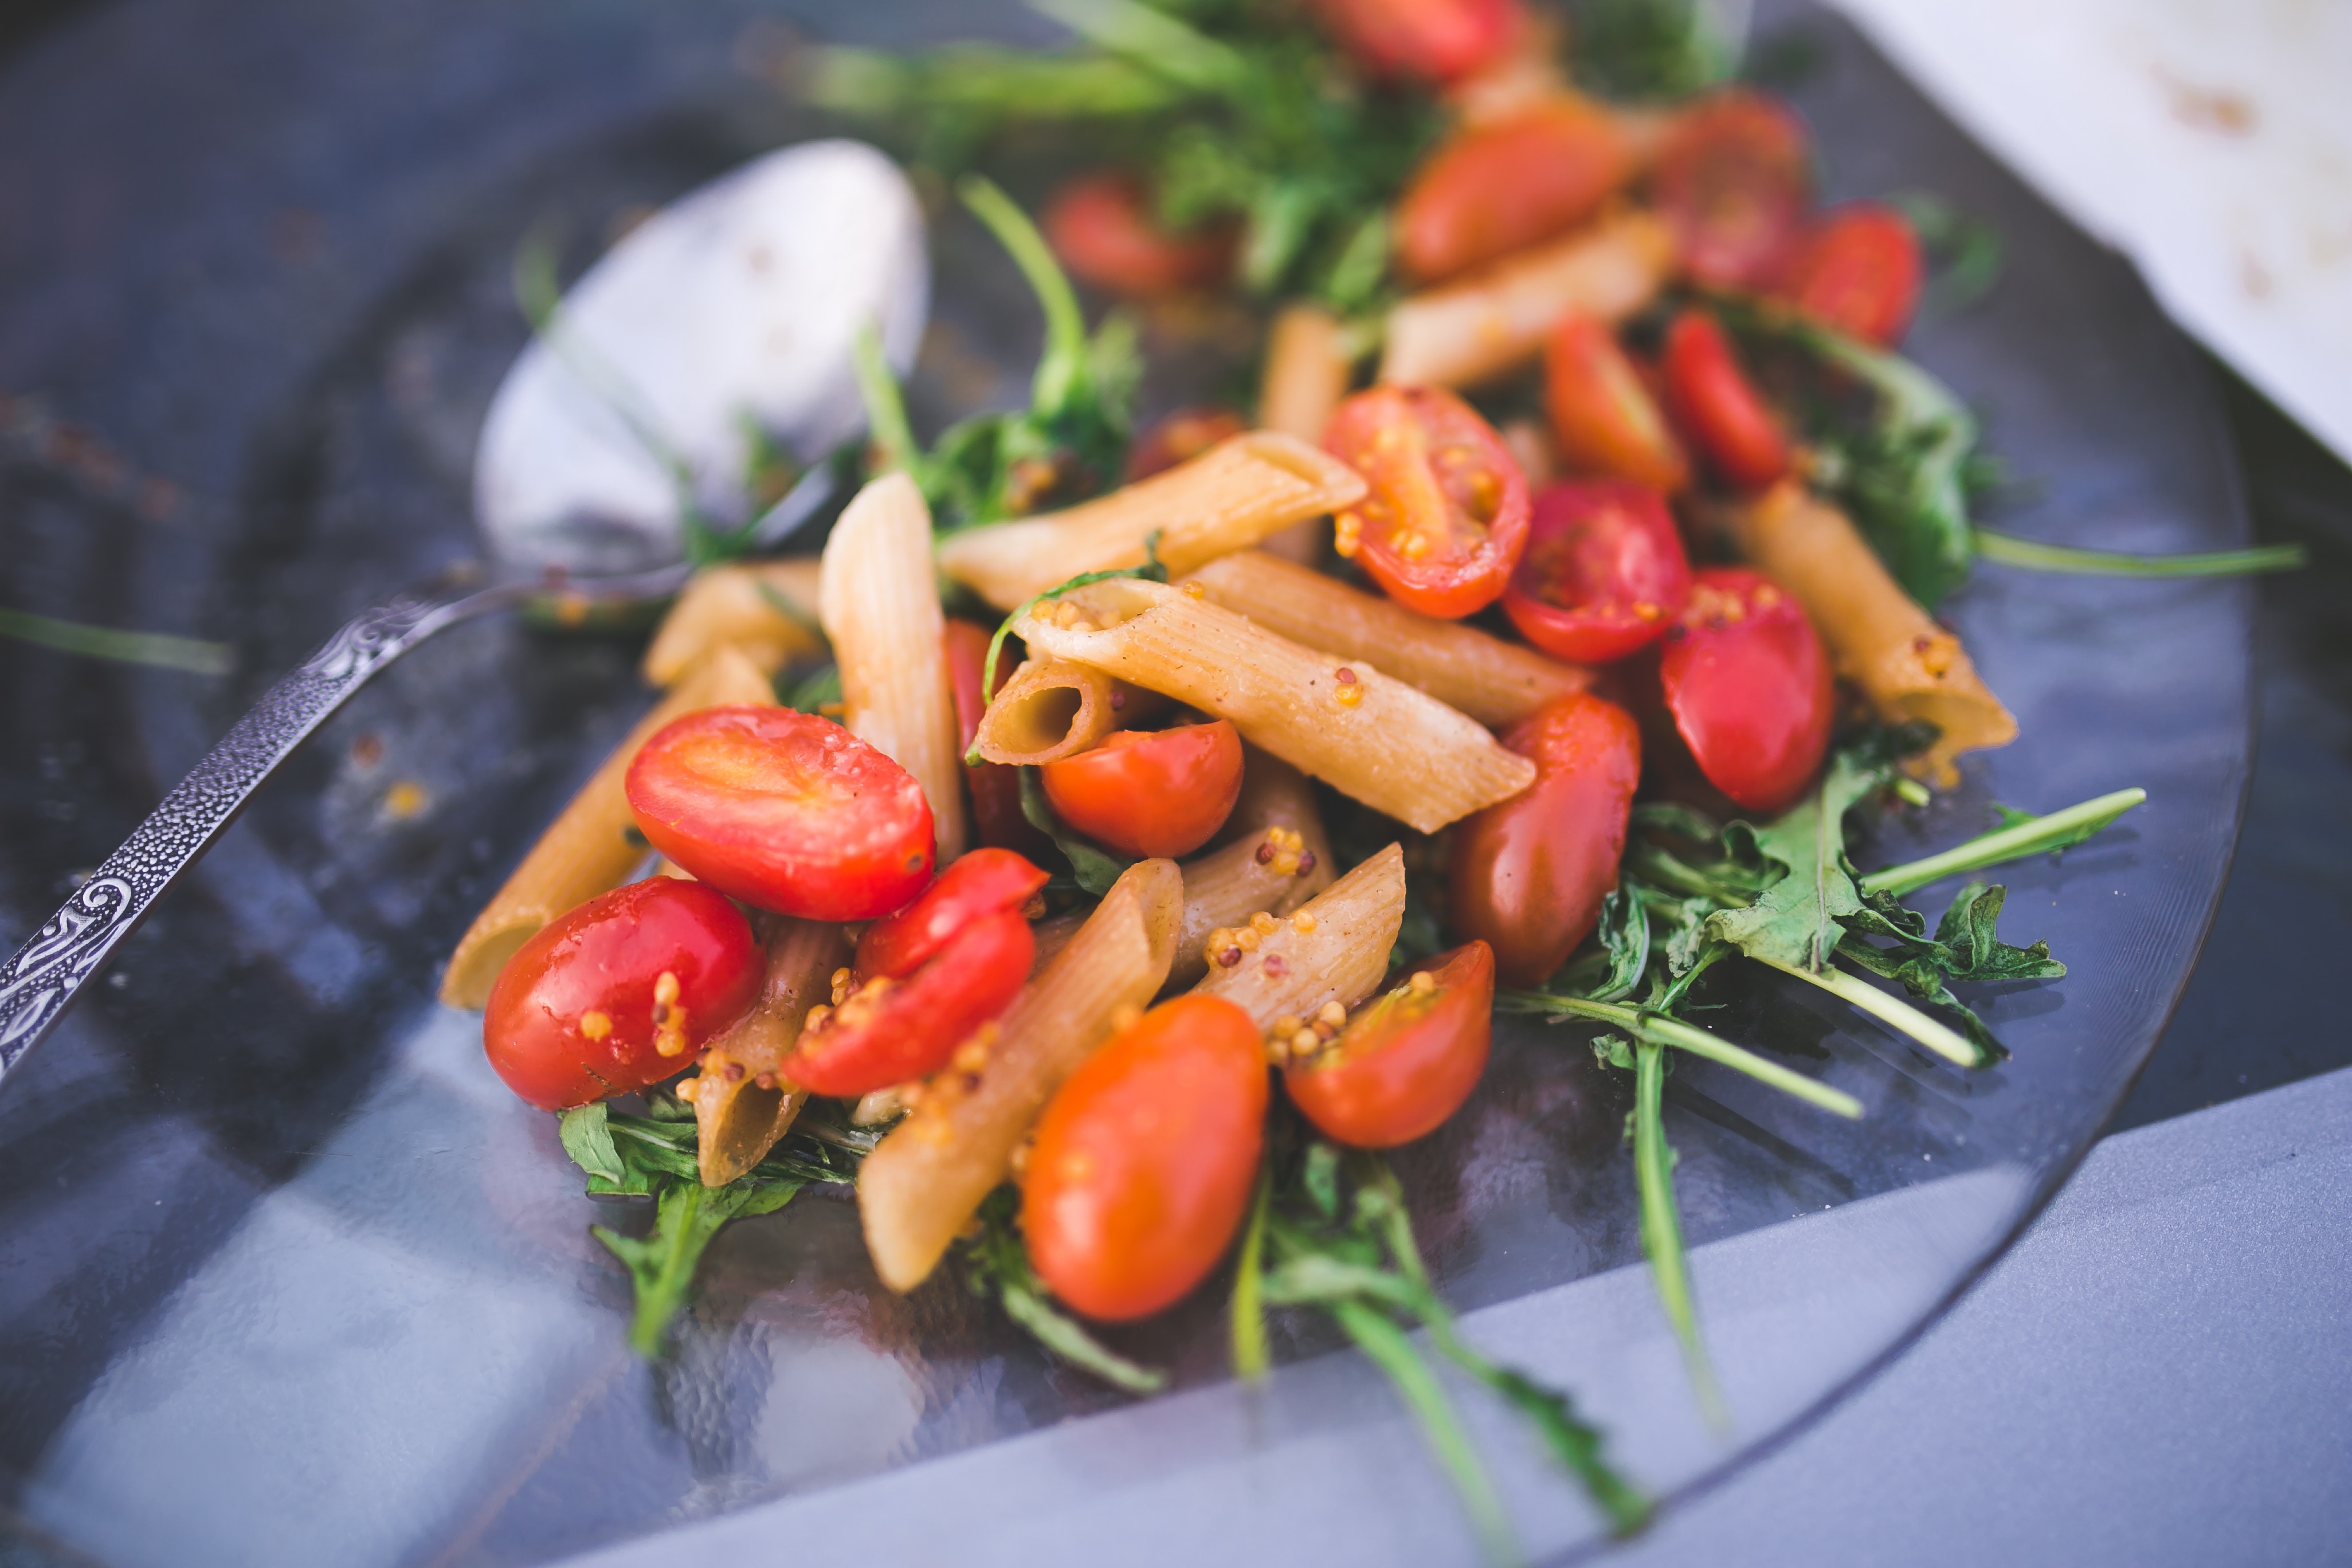 Check out these two vegan pasta salad recipes for summer entertaining!